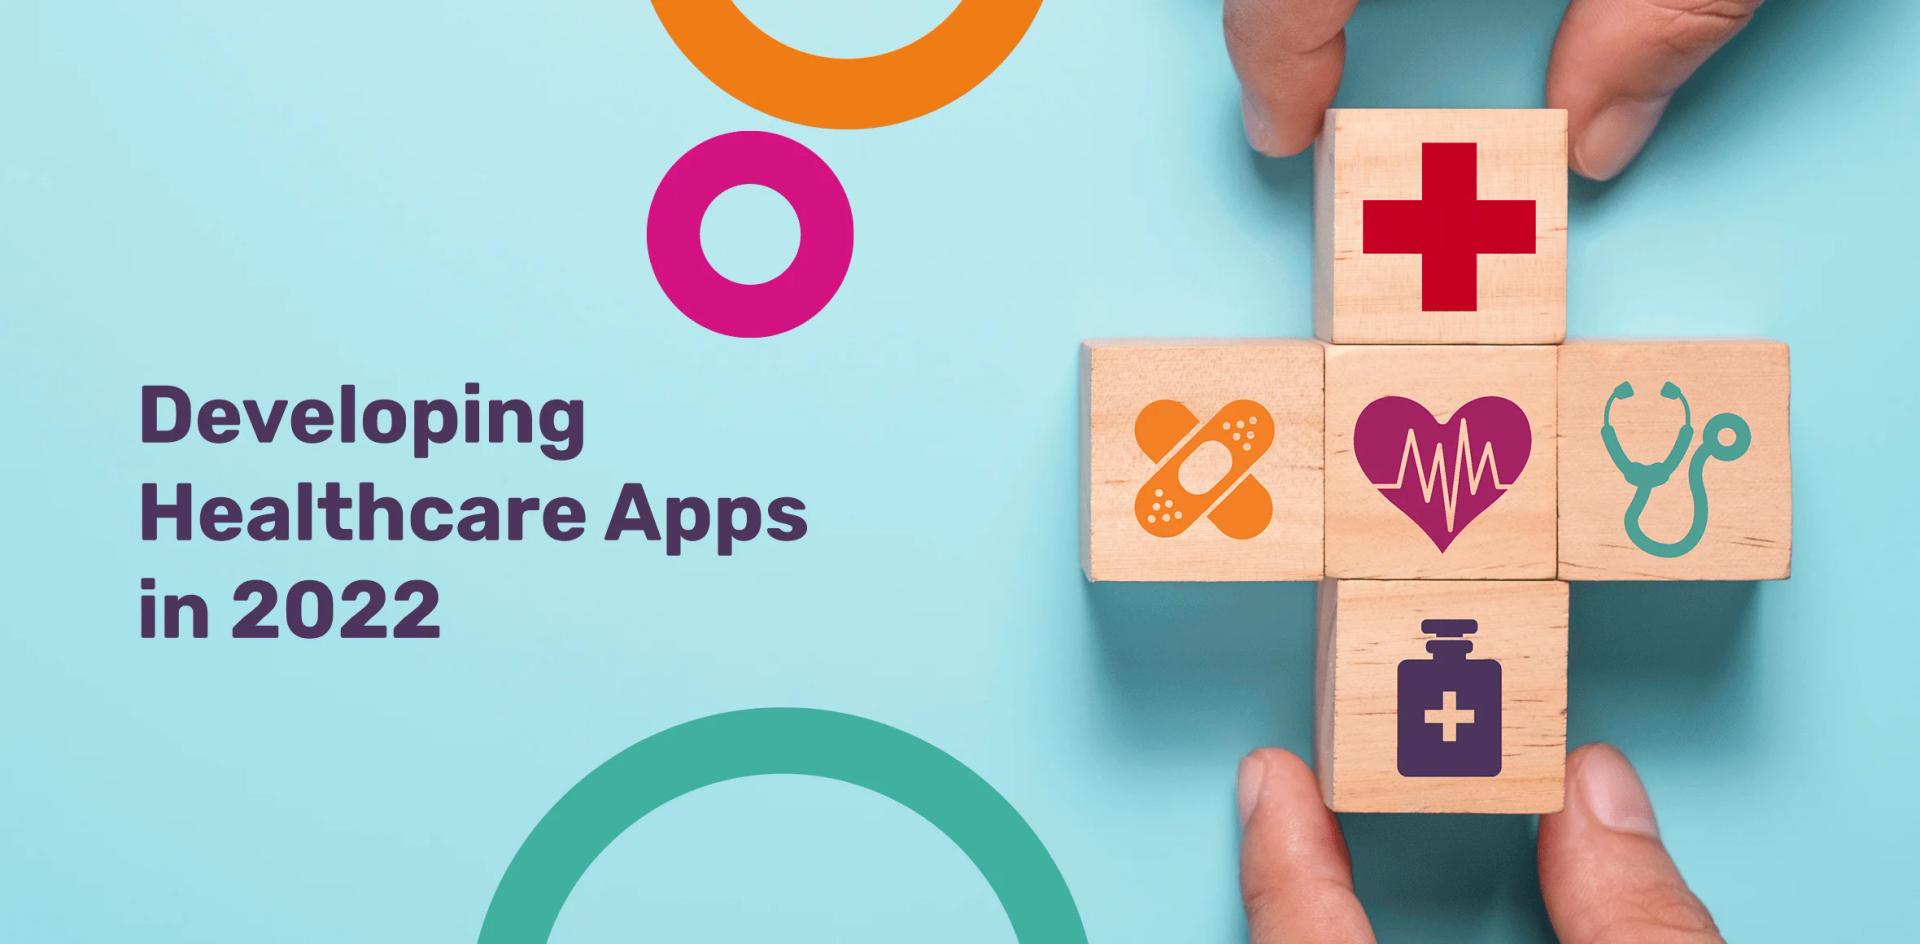 Developing Healthcare Apps in 2022